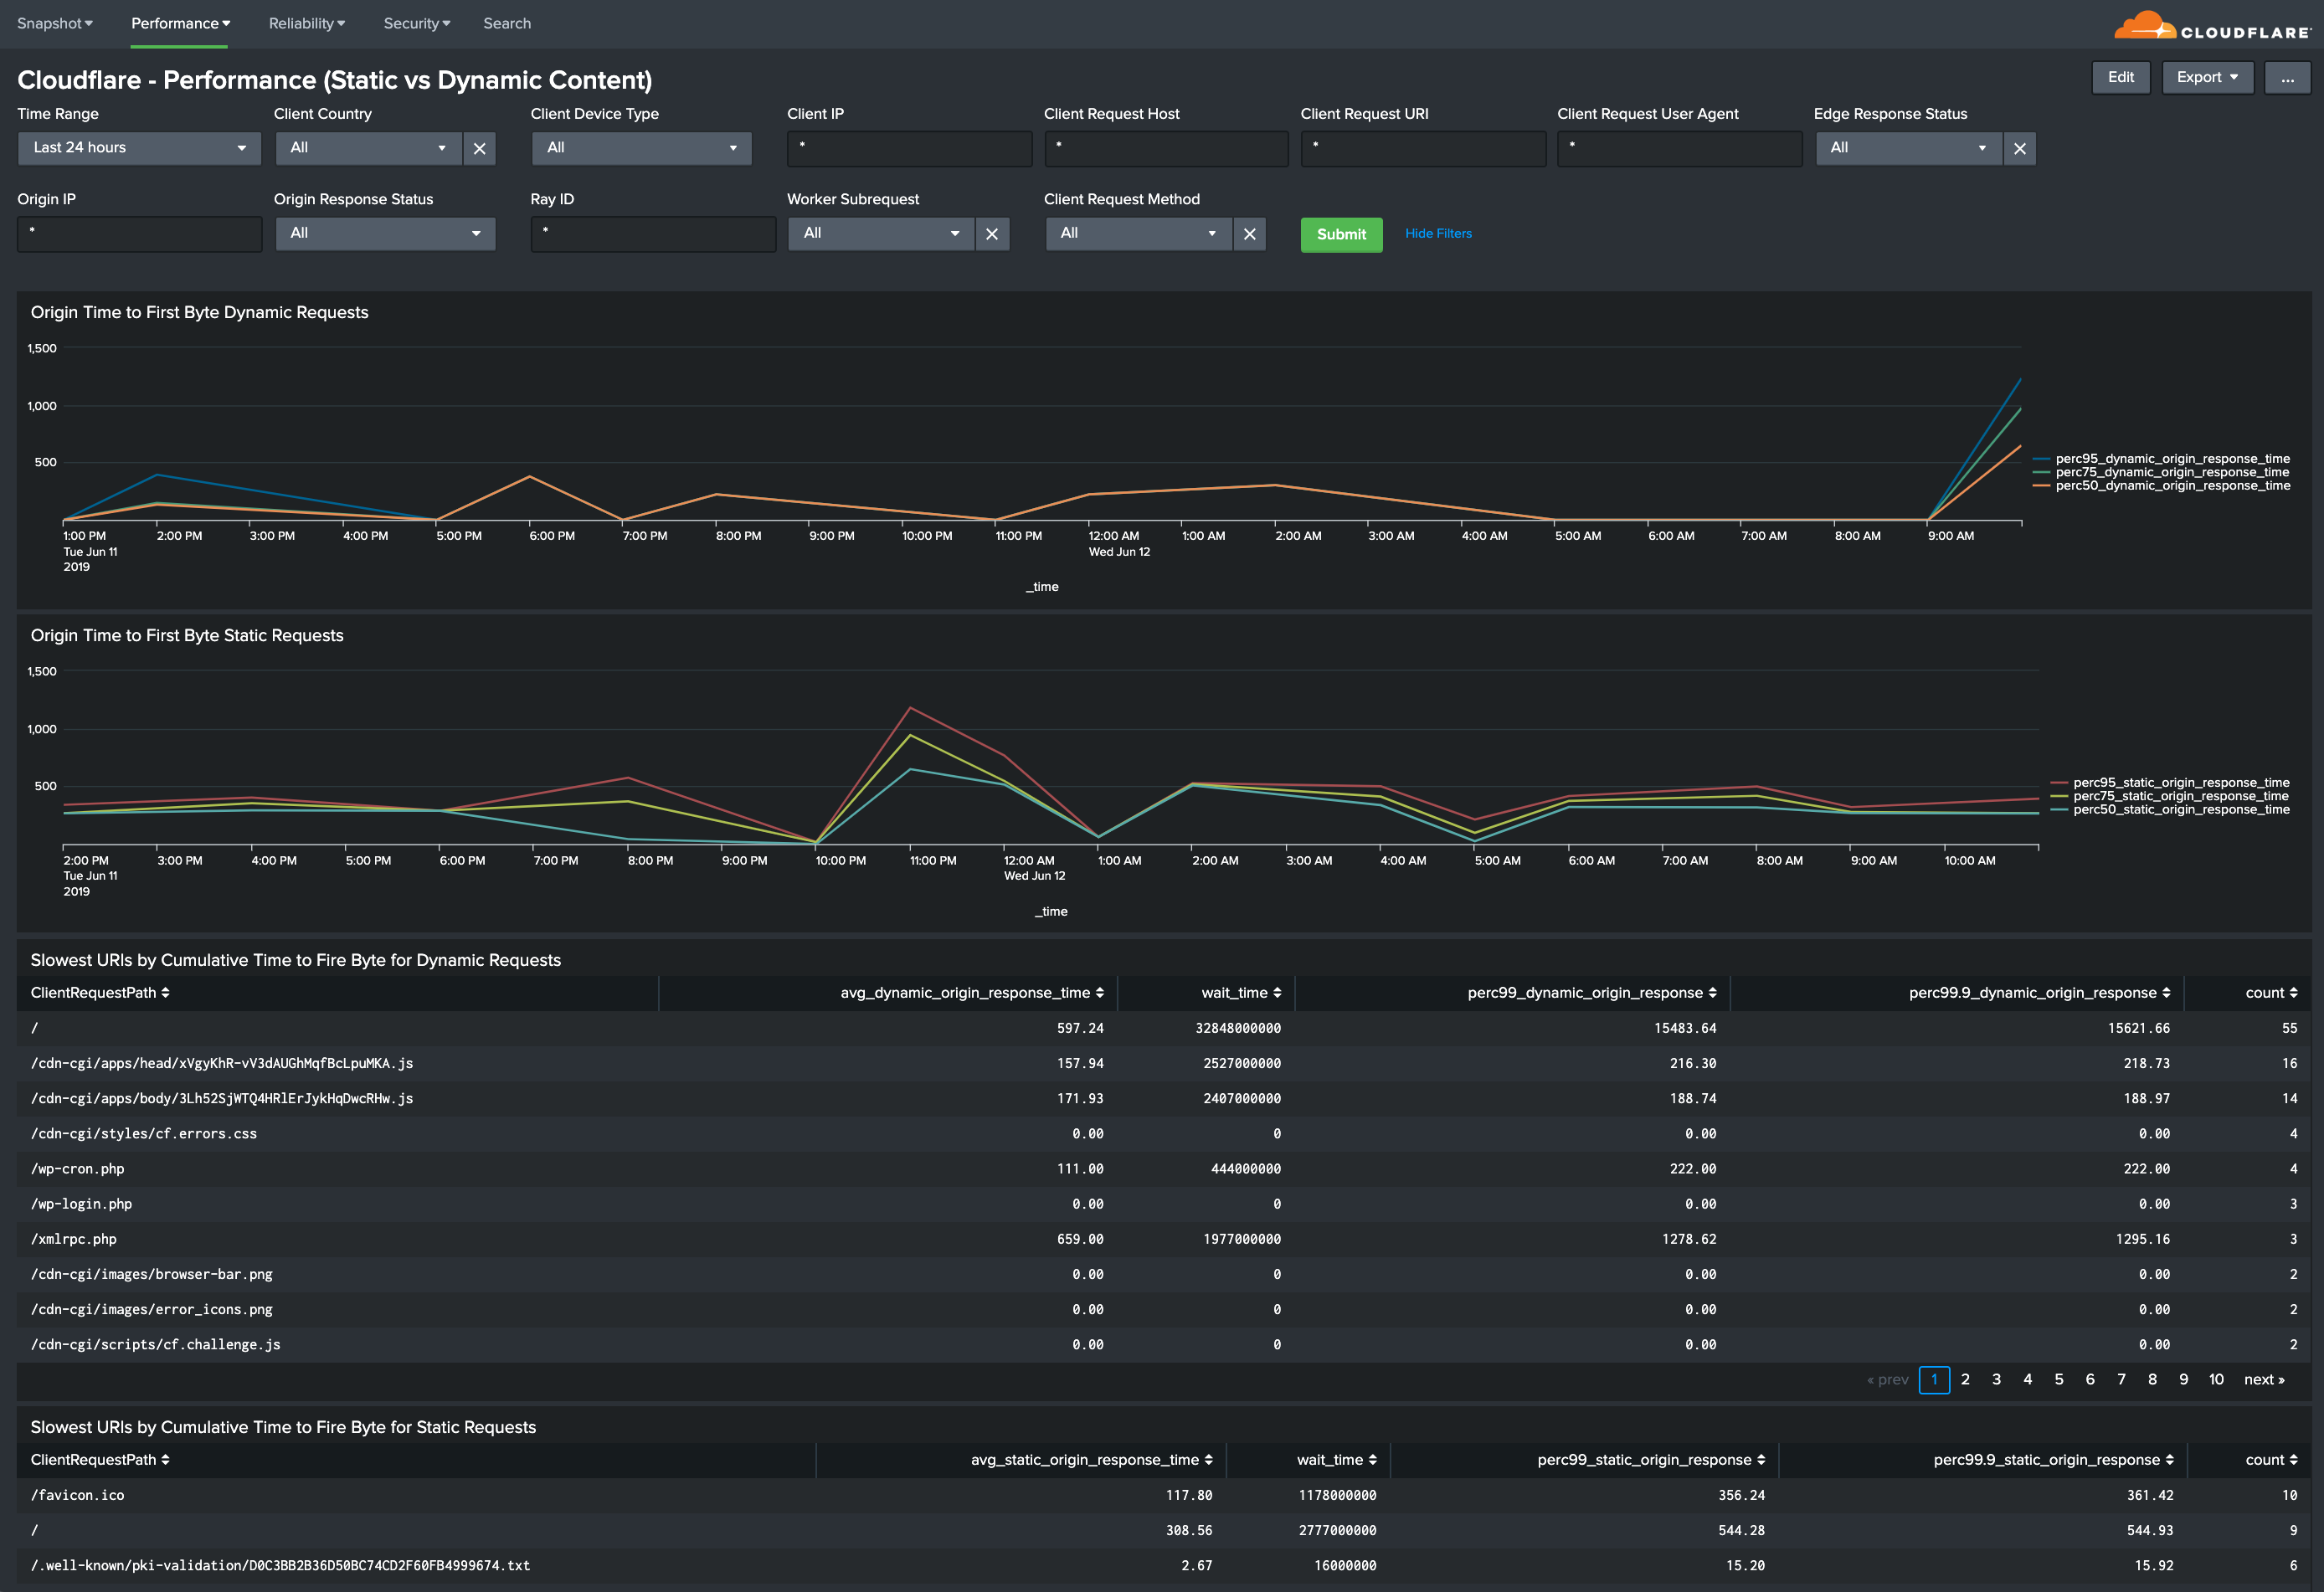 Splunk dashboard with Cloudflare Performance metrics for Static vs. Dynamic Content